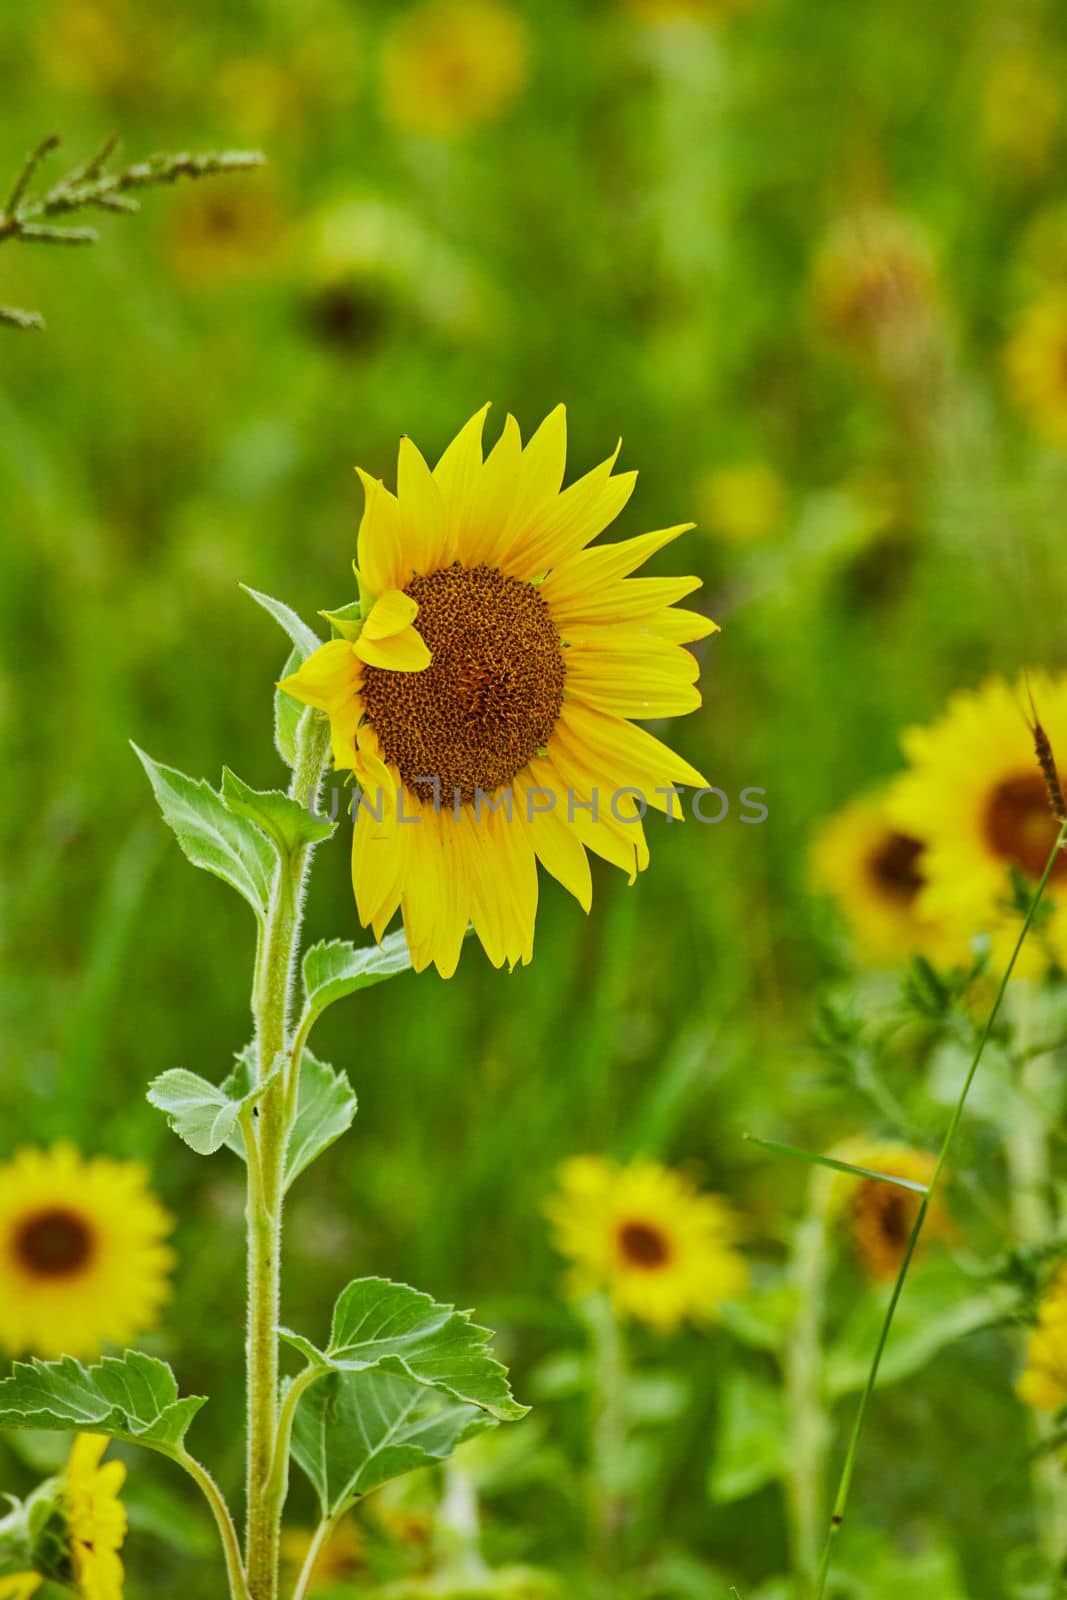 Image of Young sunflower plant in field surrounded by flowers